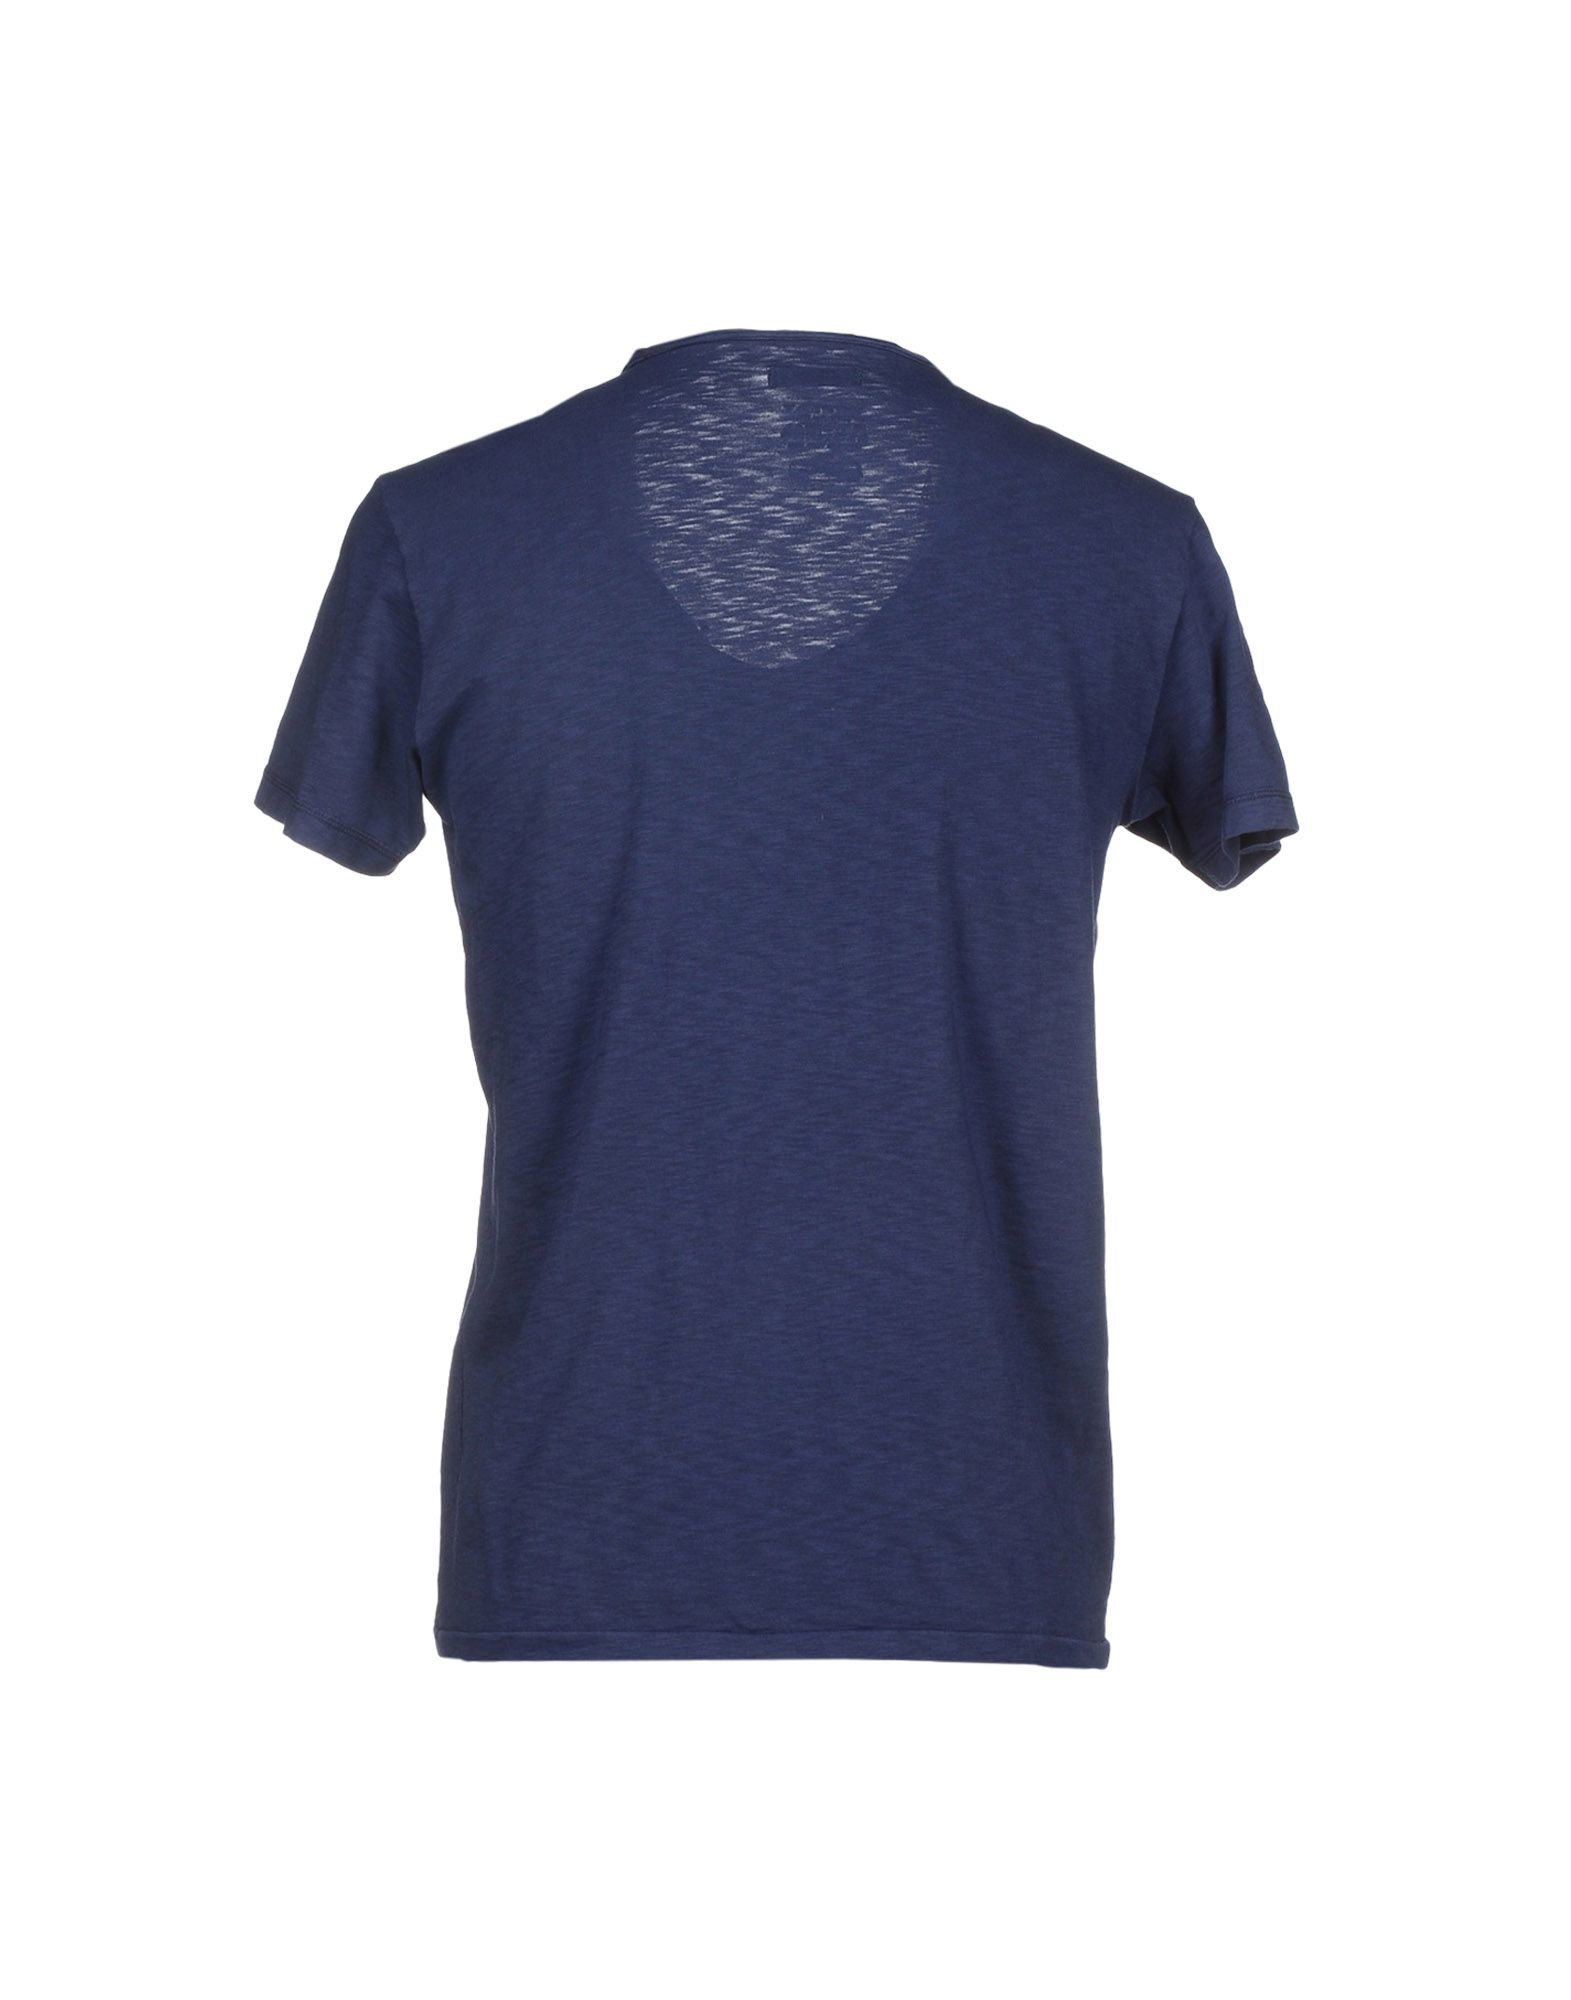 Lyst - Replay T-shirt in Blue for Men